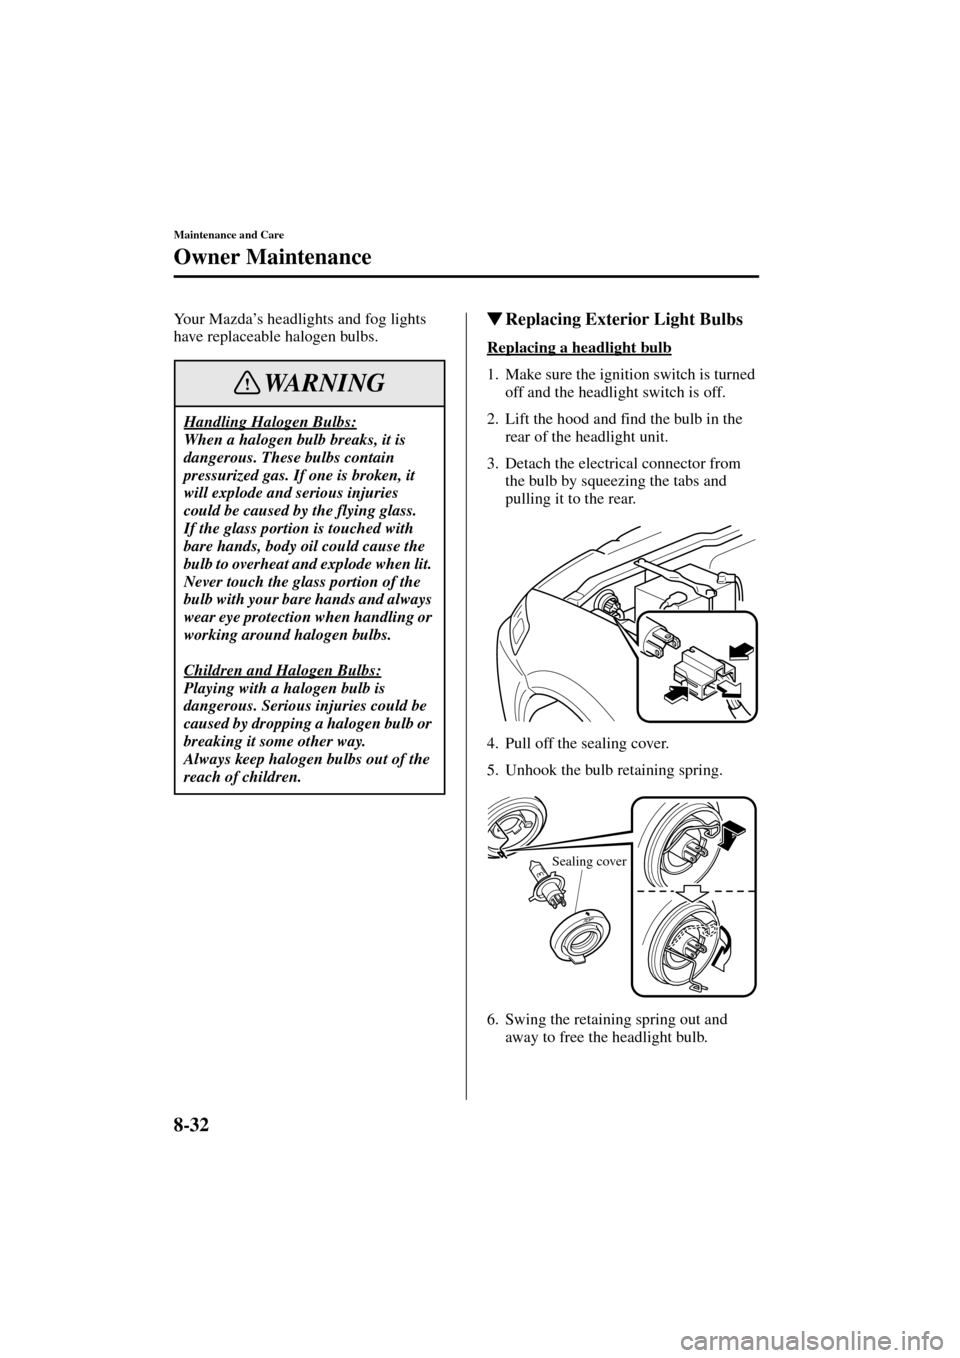 MAZDA MODEL MPV 2004  Owners Manual (in English) 8-32
Maintenance and Care
Owner Maintenance
Form No. 8S06-EA-03H
Your Mazda’s headlights and fog lights 
have replaceable halogen bulbs.Replacing Exterior Light Bulbs
Replacing a headlight bulb
1. 